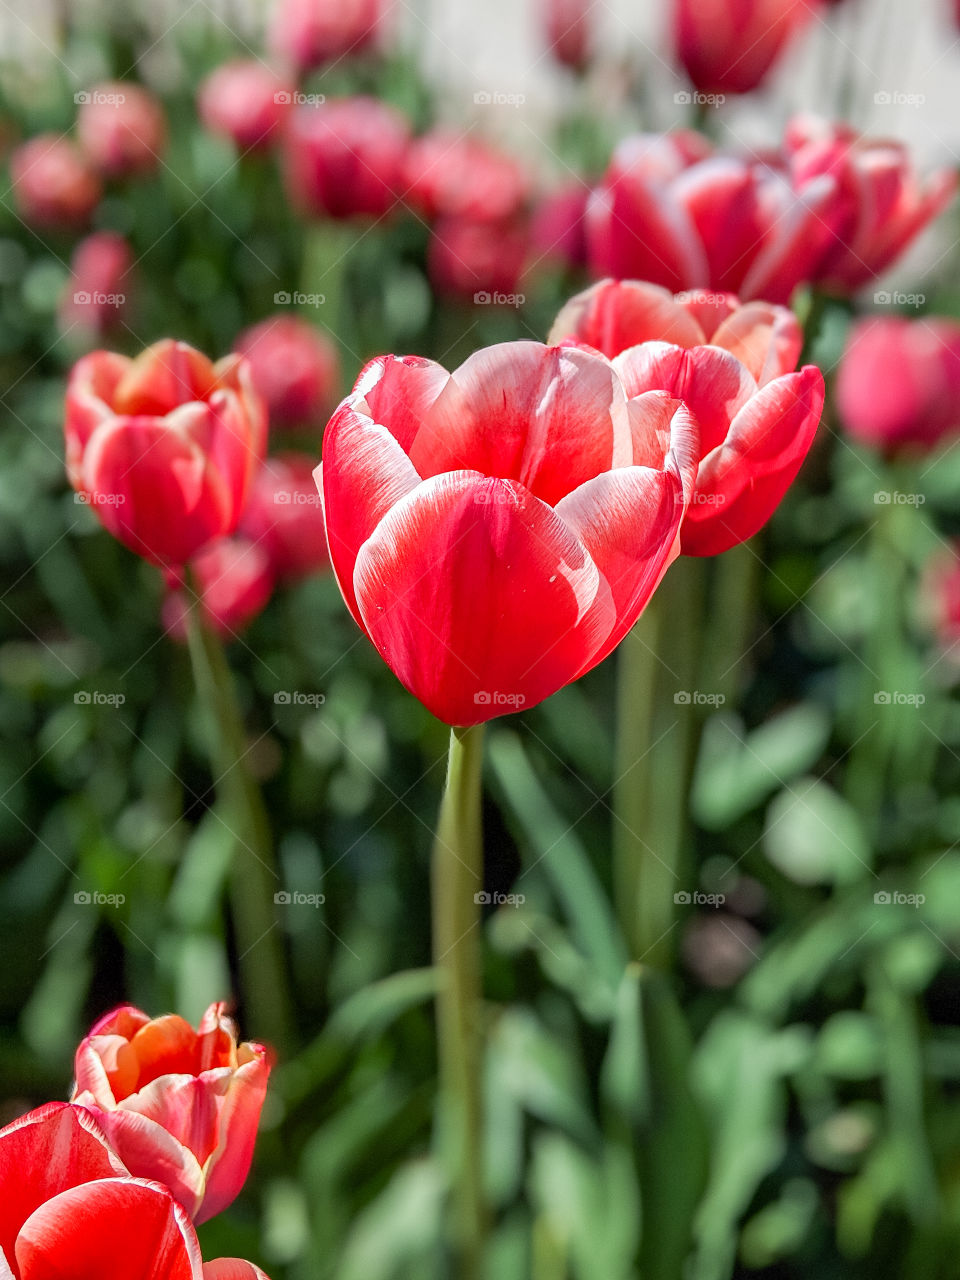 Vibrant Bright and Colorful Red Pink White Tulips